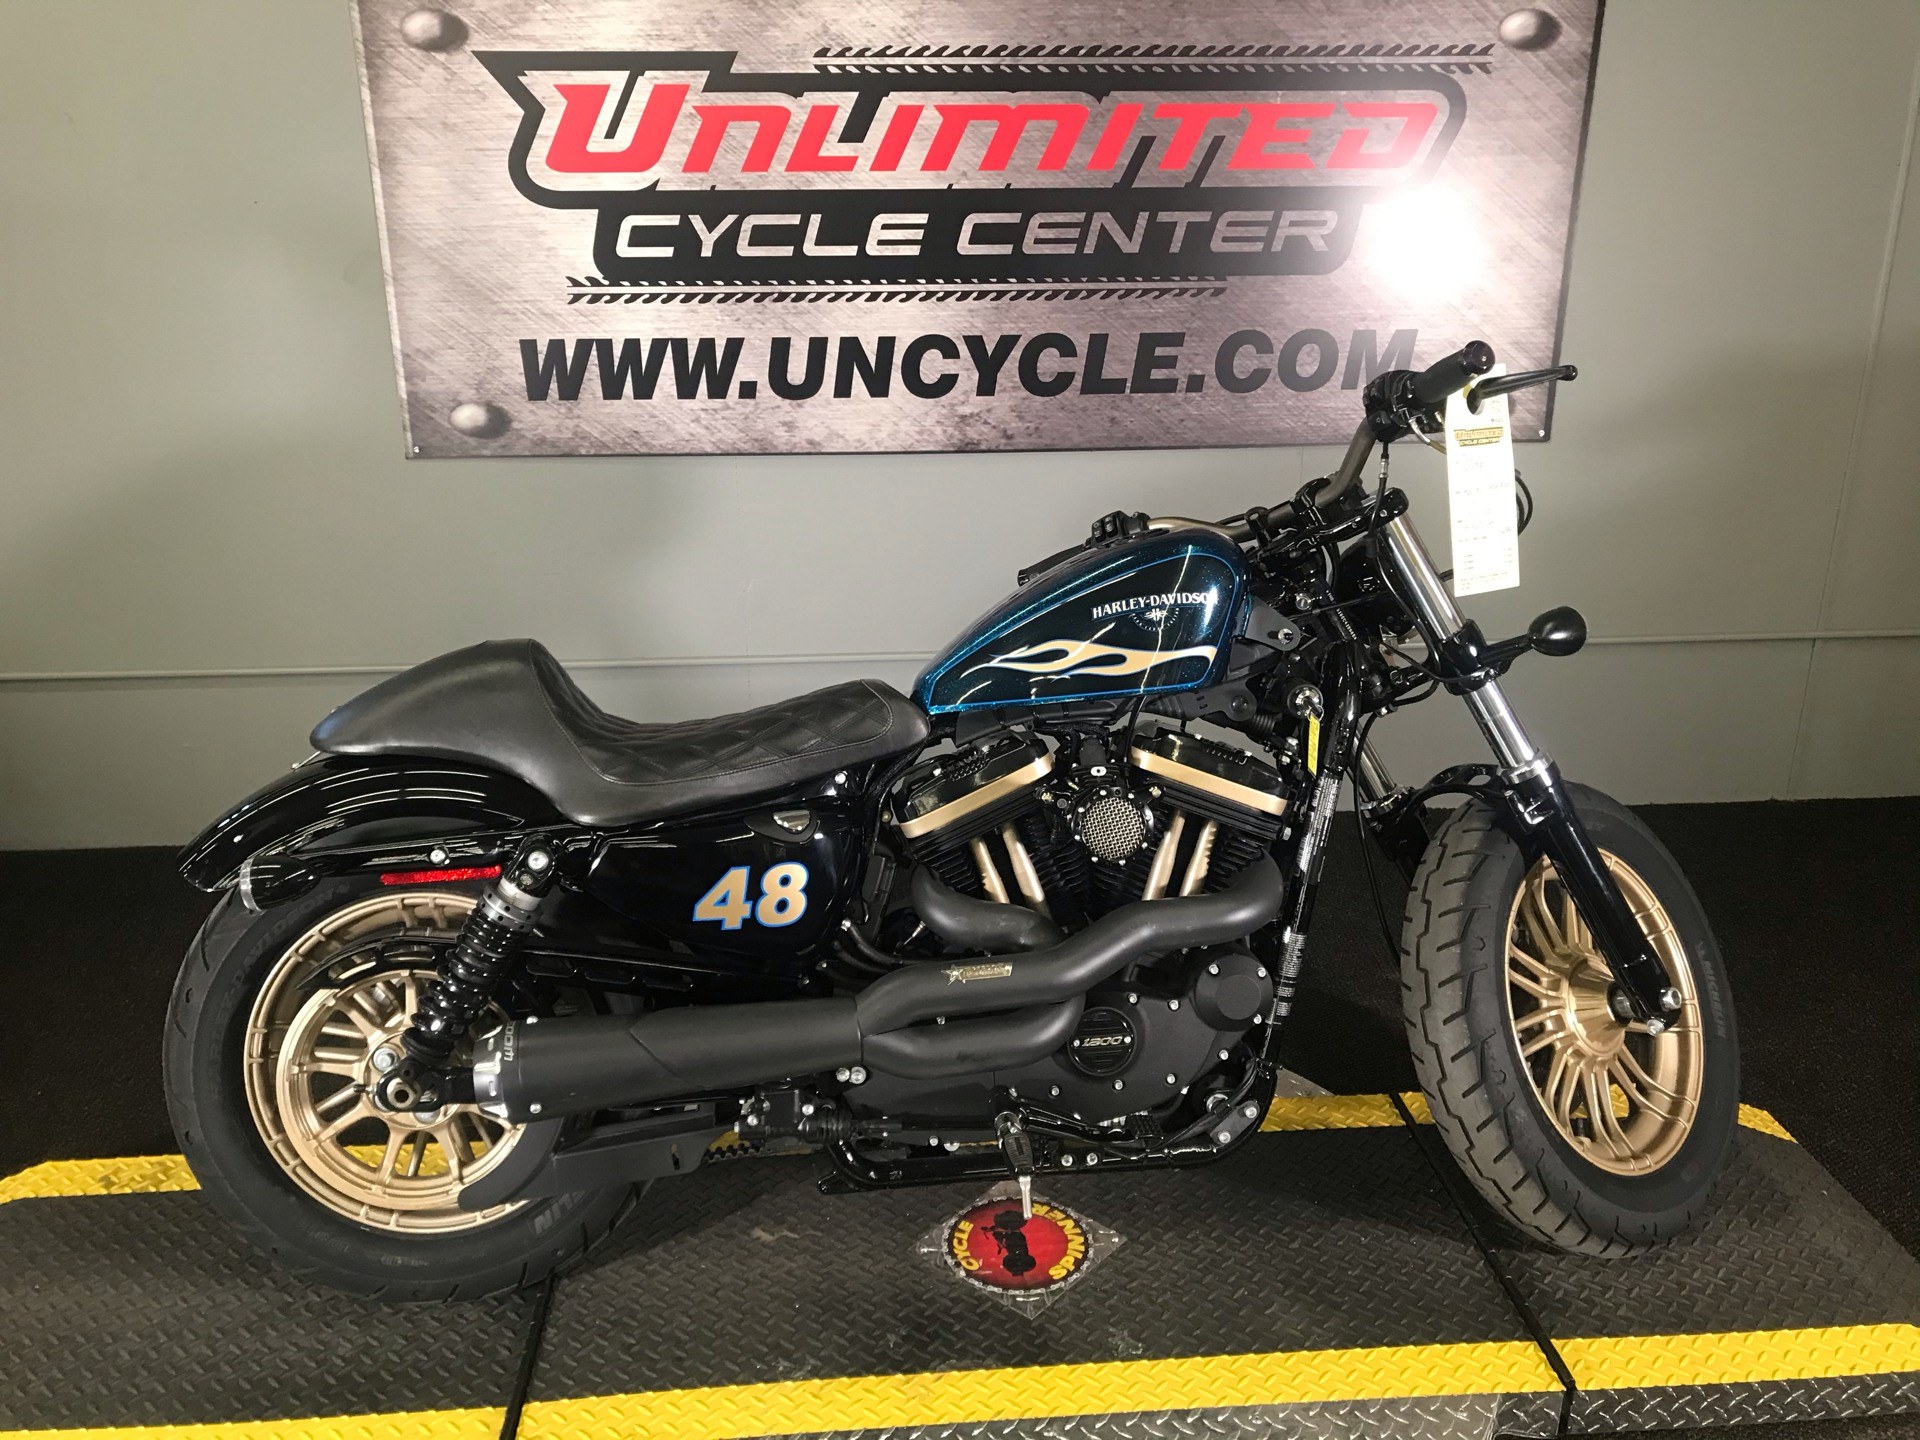 Used 2016 Harley Davidson Forty Eight Motorcycles In Tyrone Pa 412562 Hard Candy Cancun Blue Flake